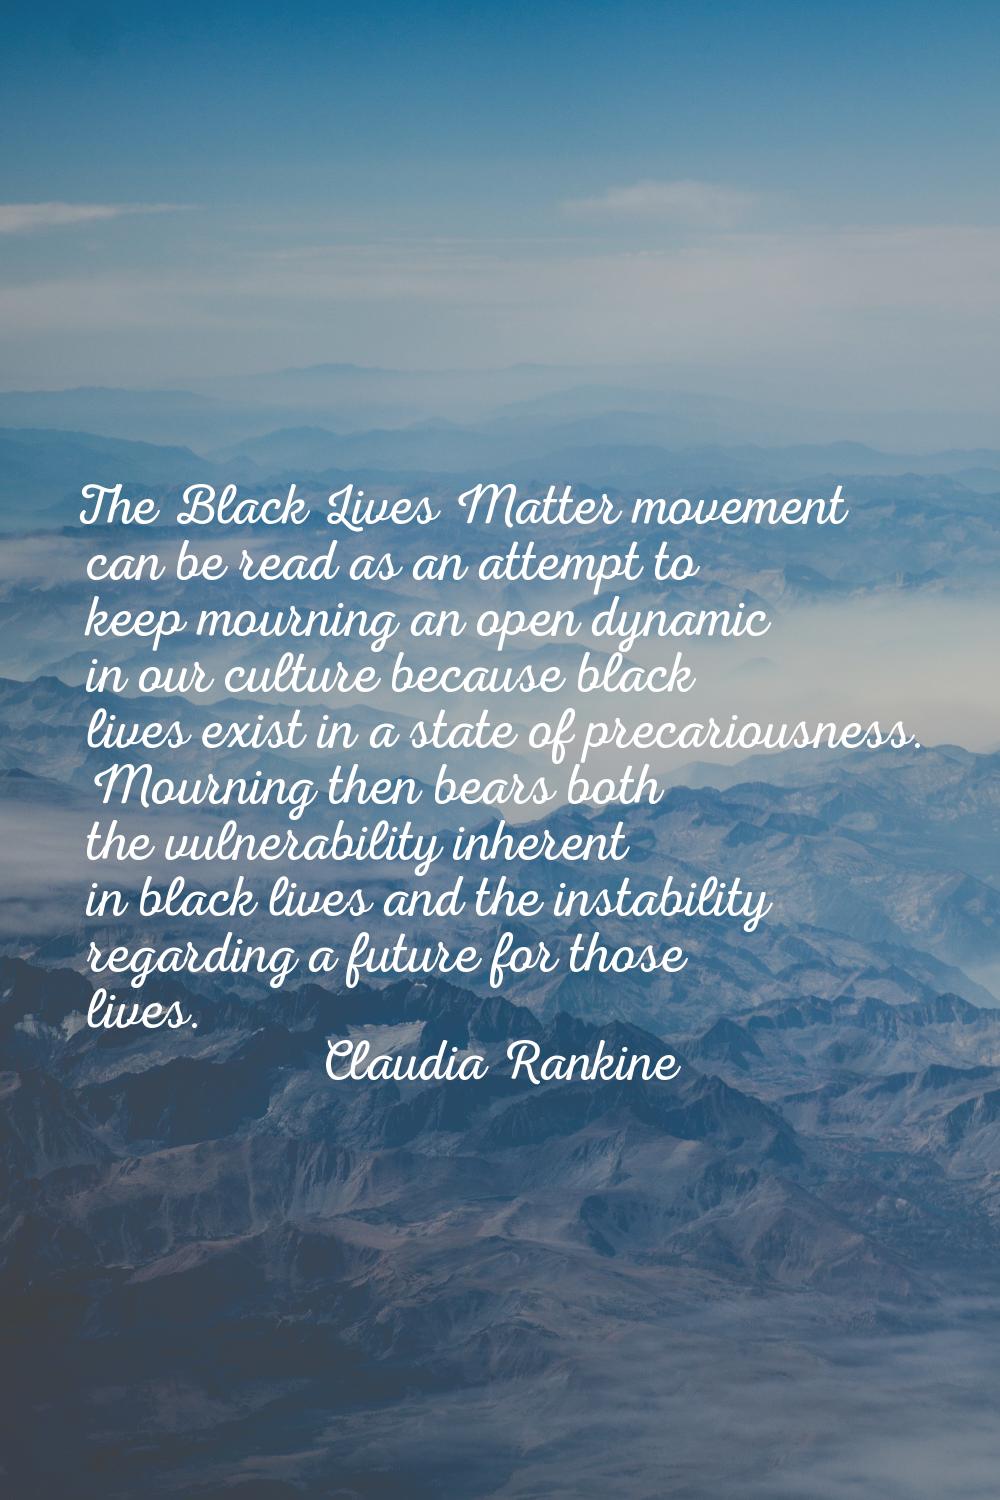 The Black Lives Matter movement can be read as an attempt to keep mourning an open dynamic in our c